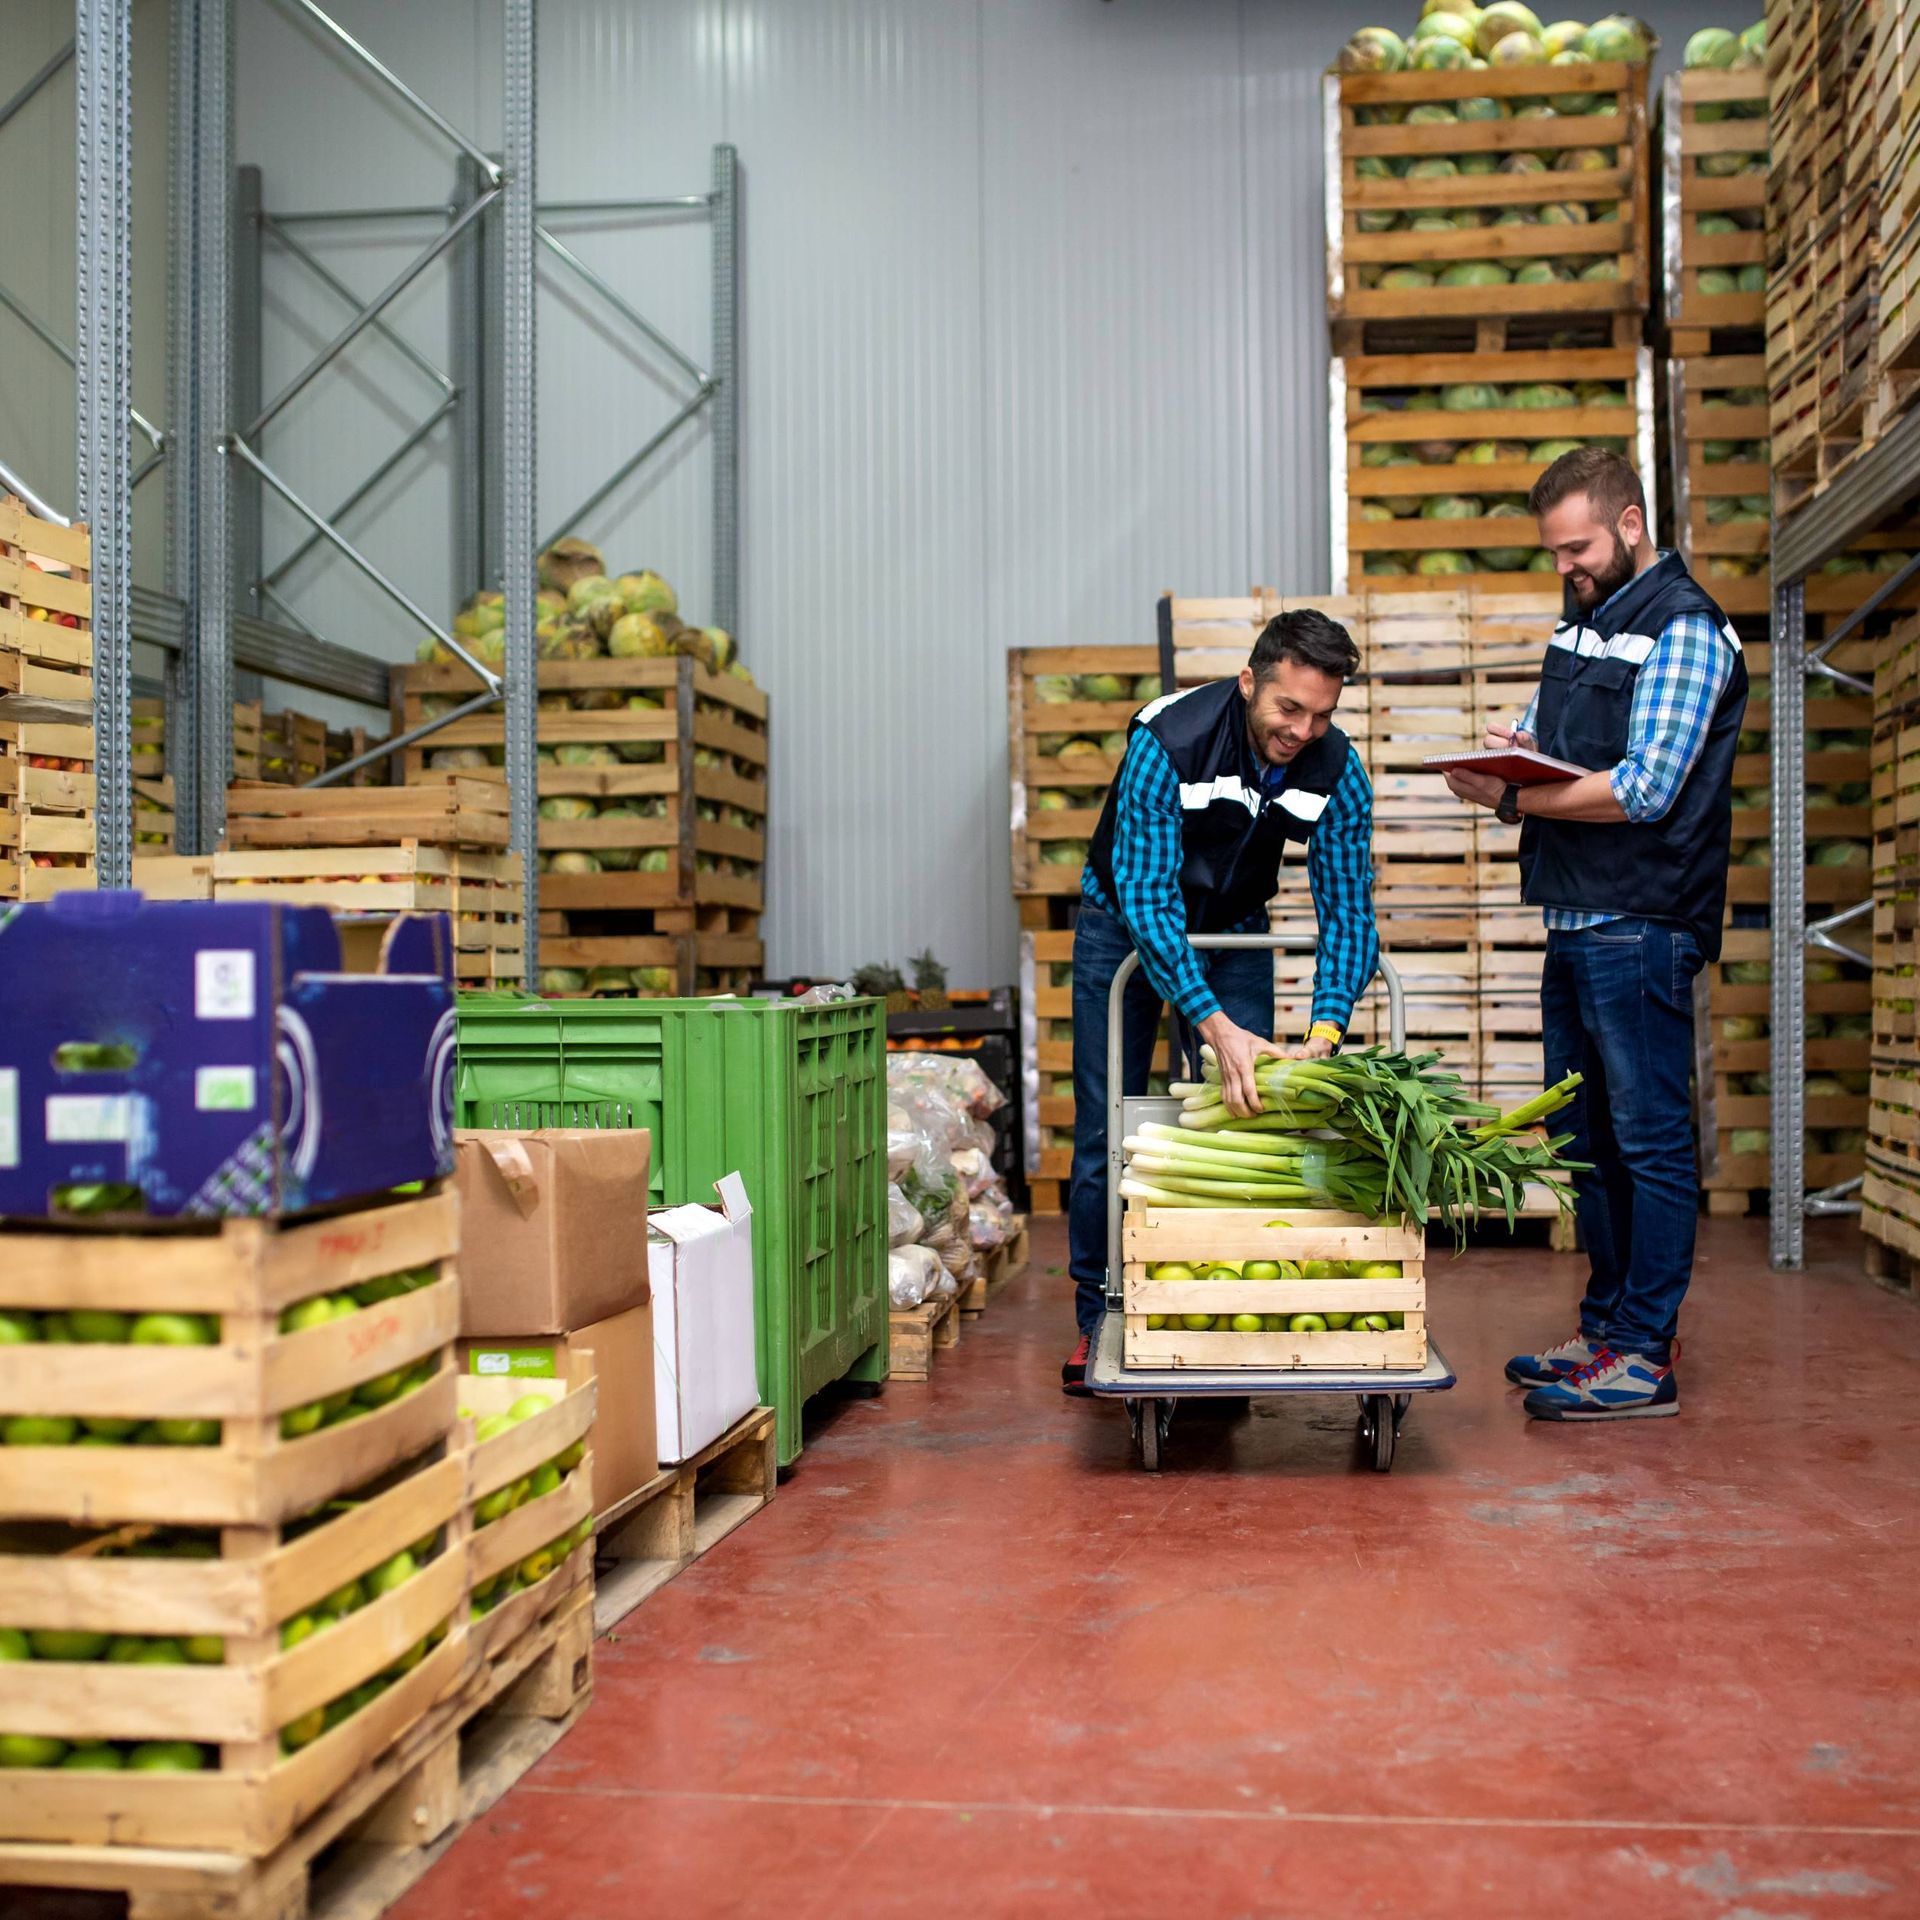 Image of a fruit and vegetable warehouse segregating produce